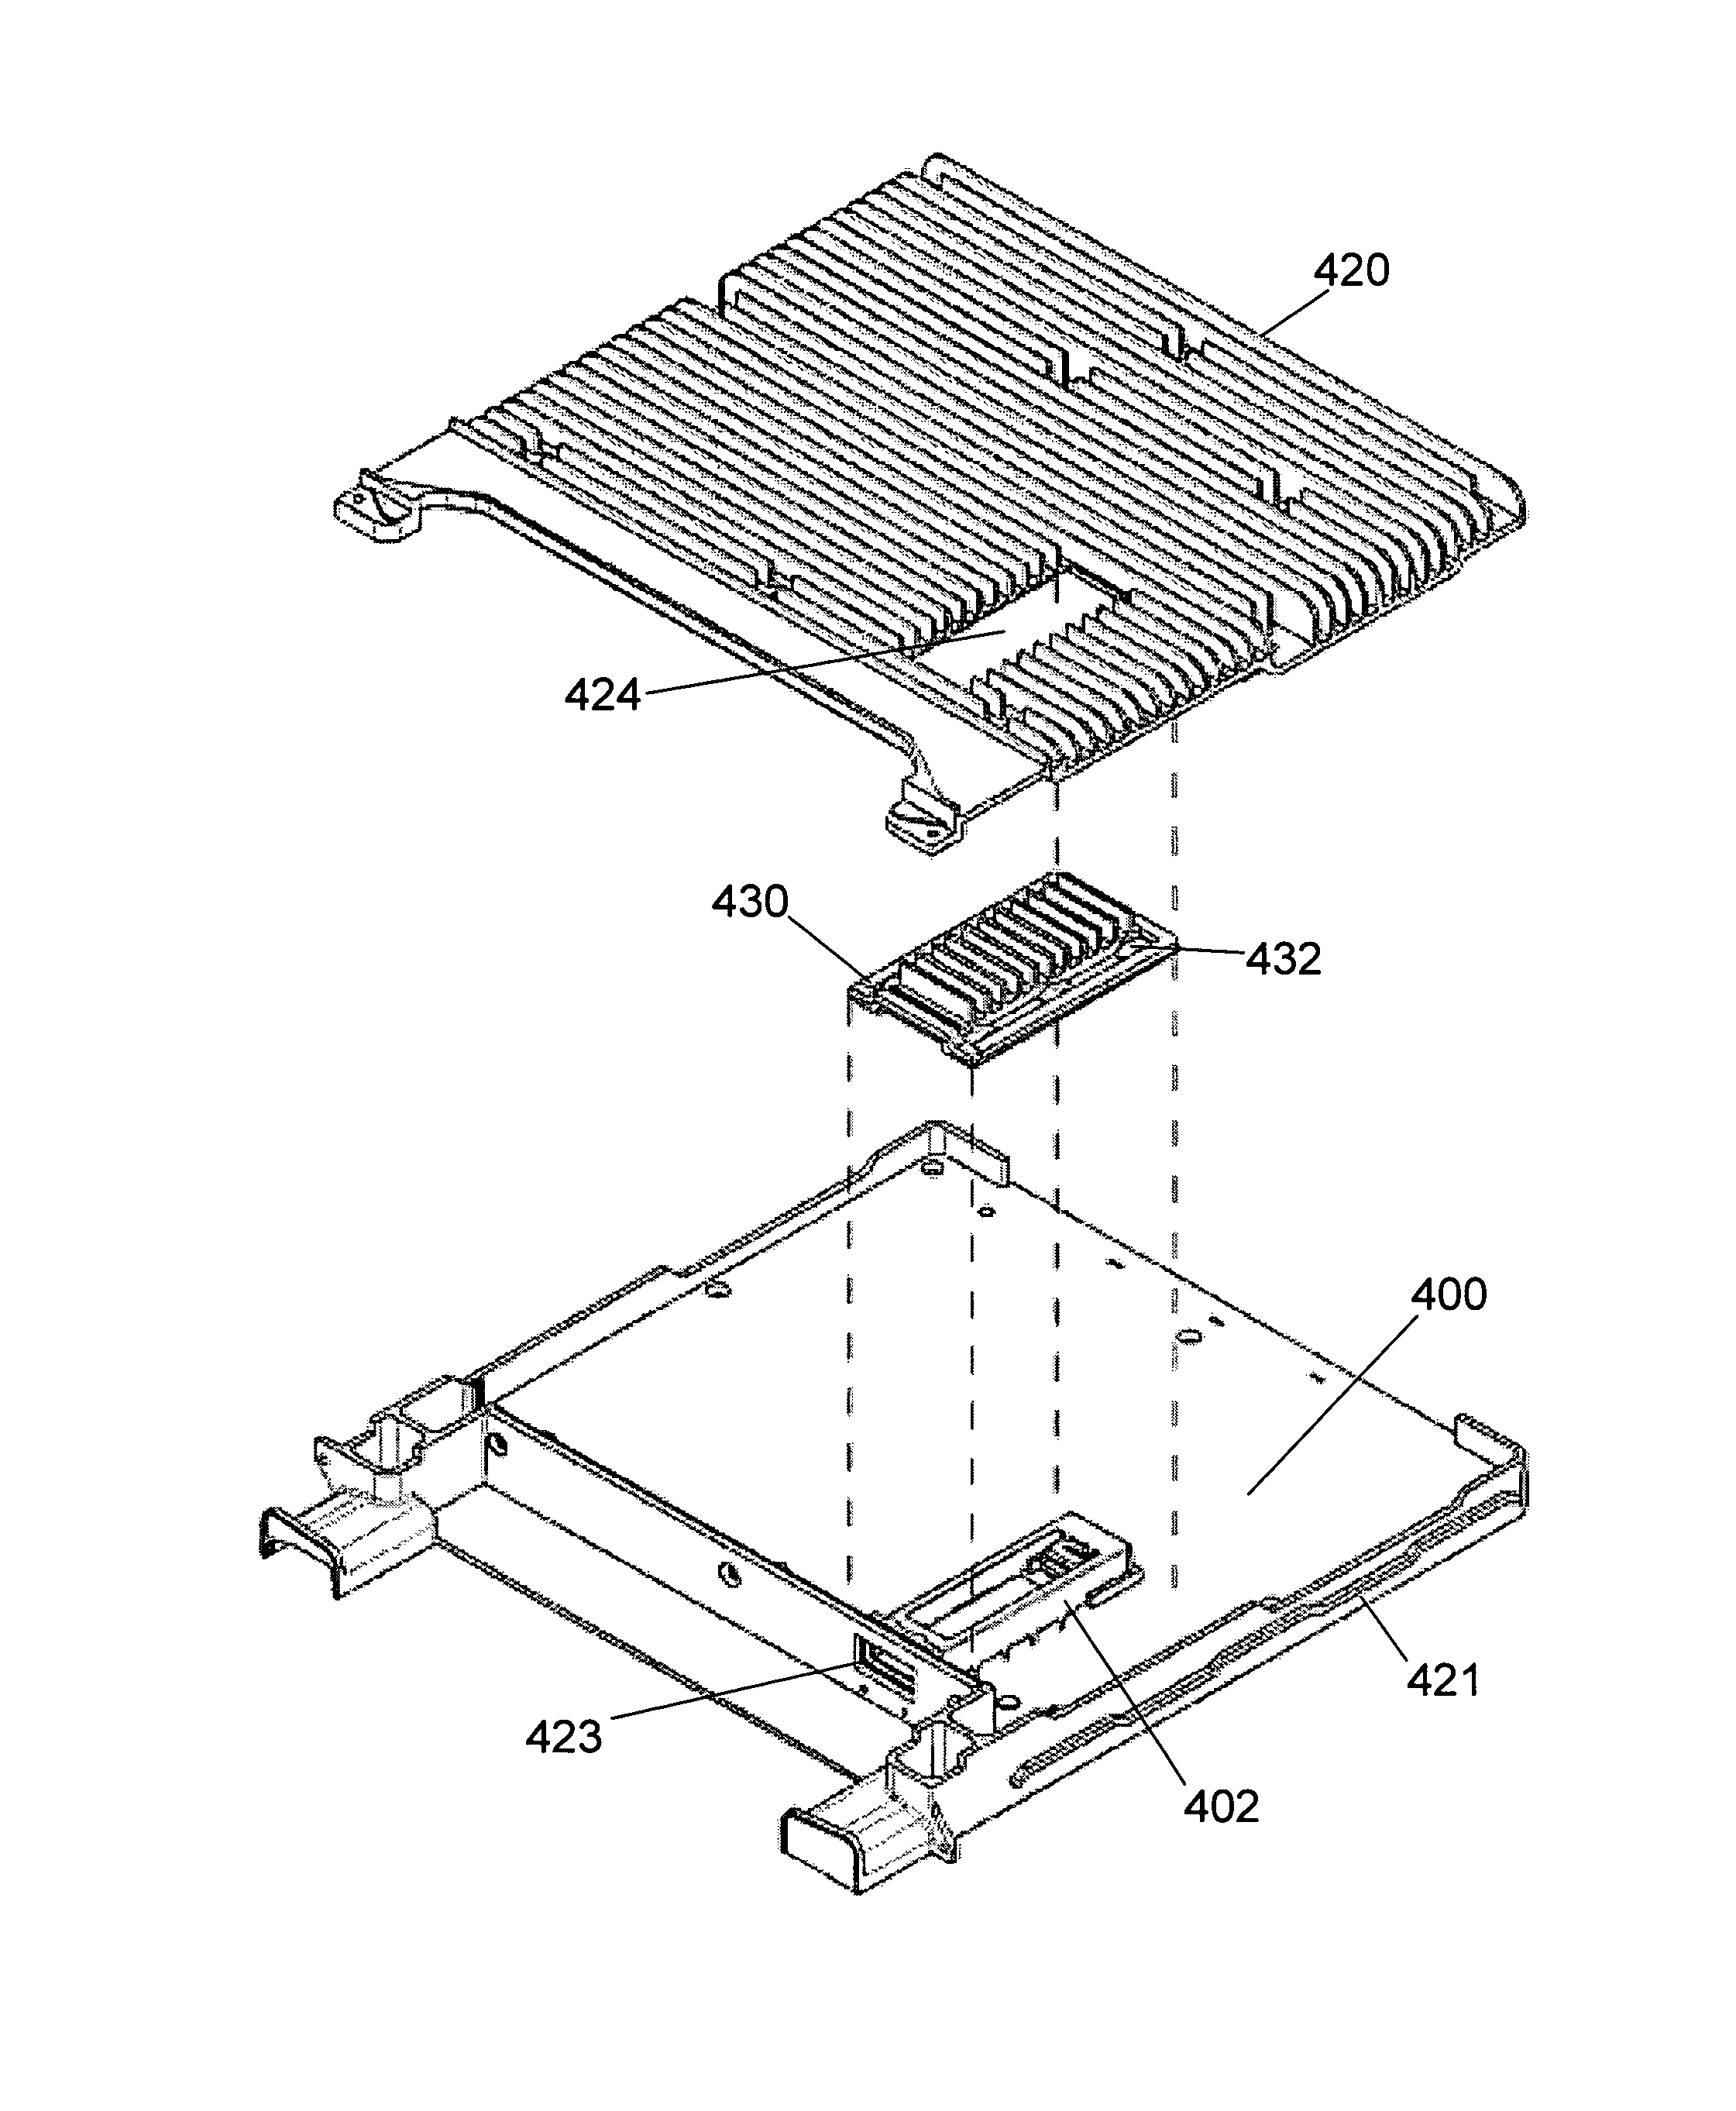 Floating heatsink for removable components